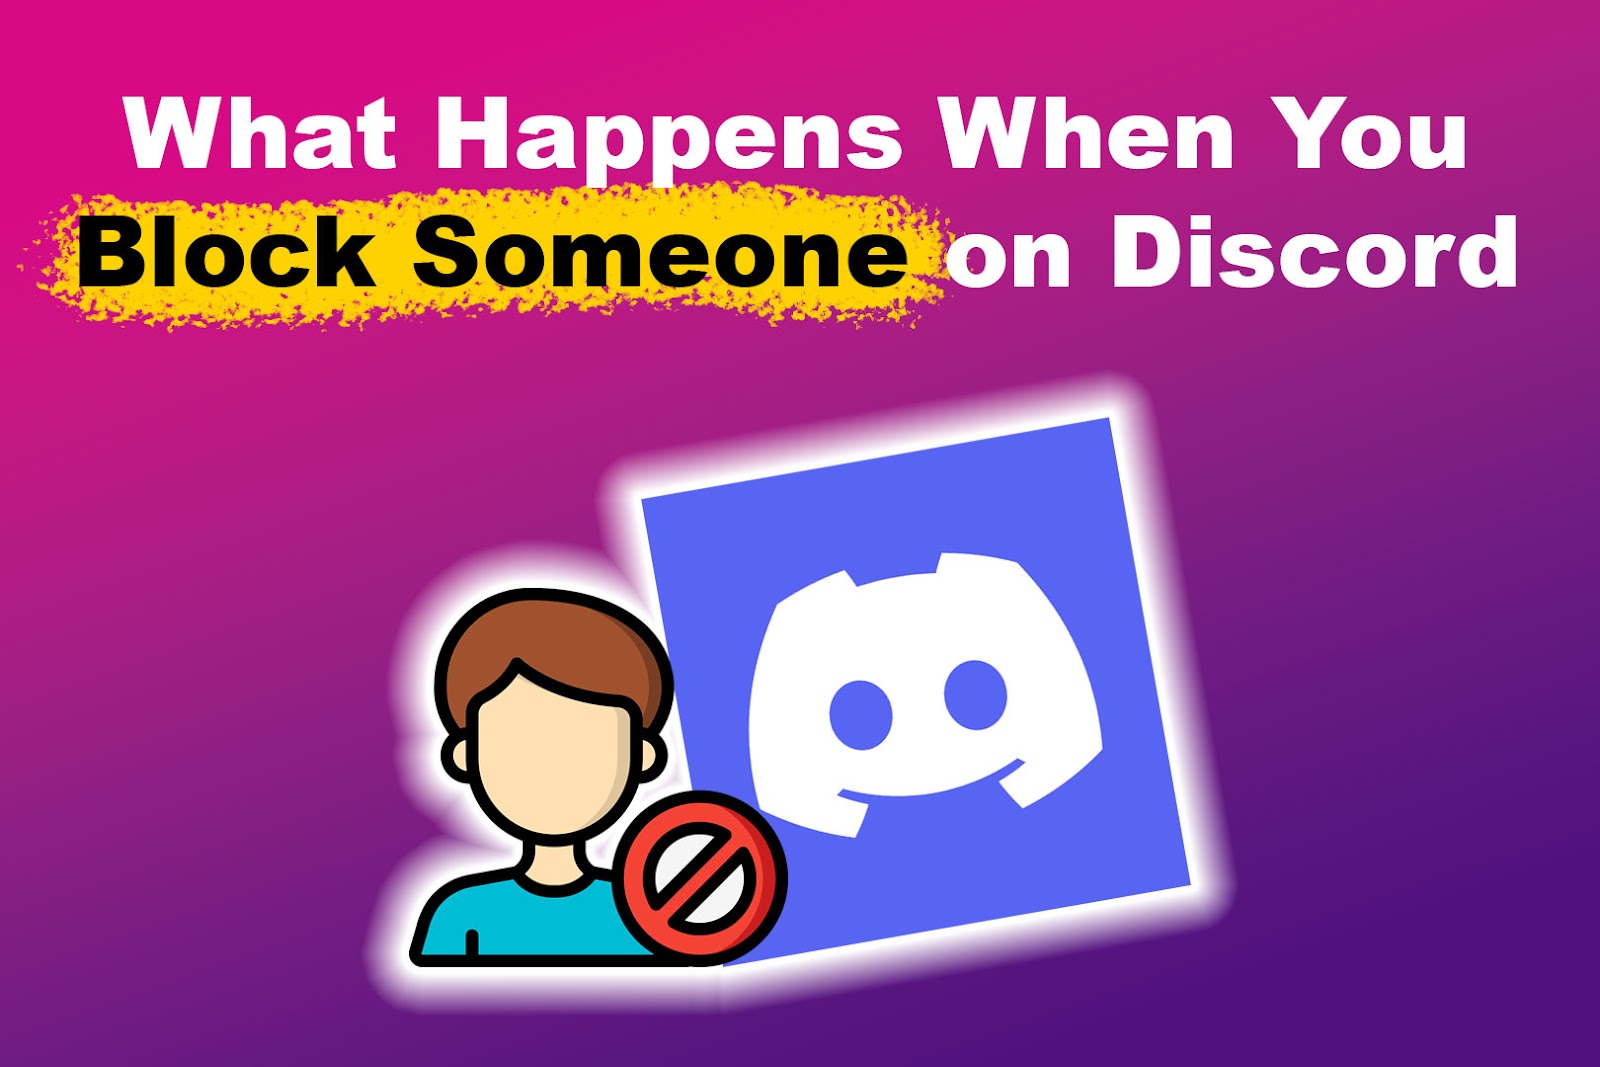 5 Things That Happen When You Block Someone on Discord